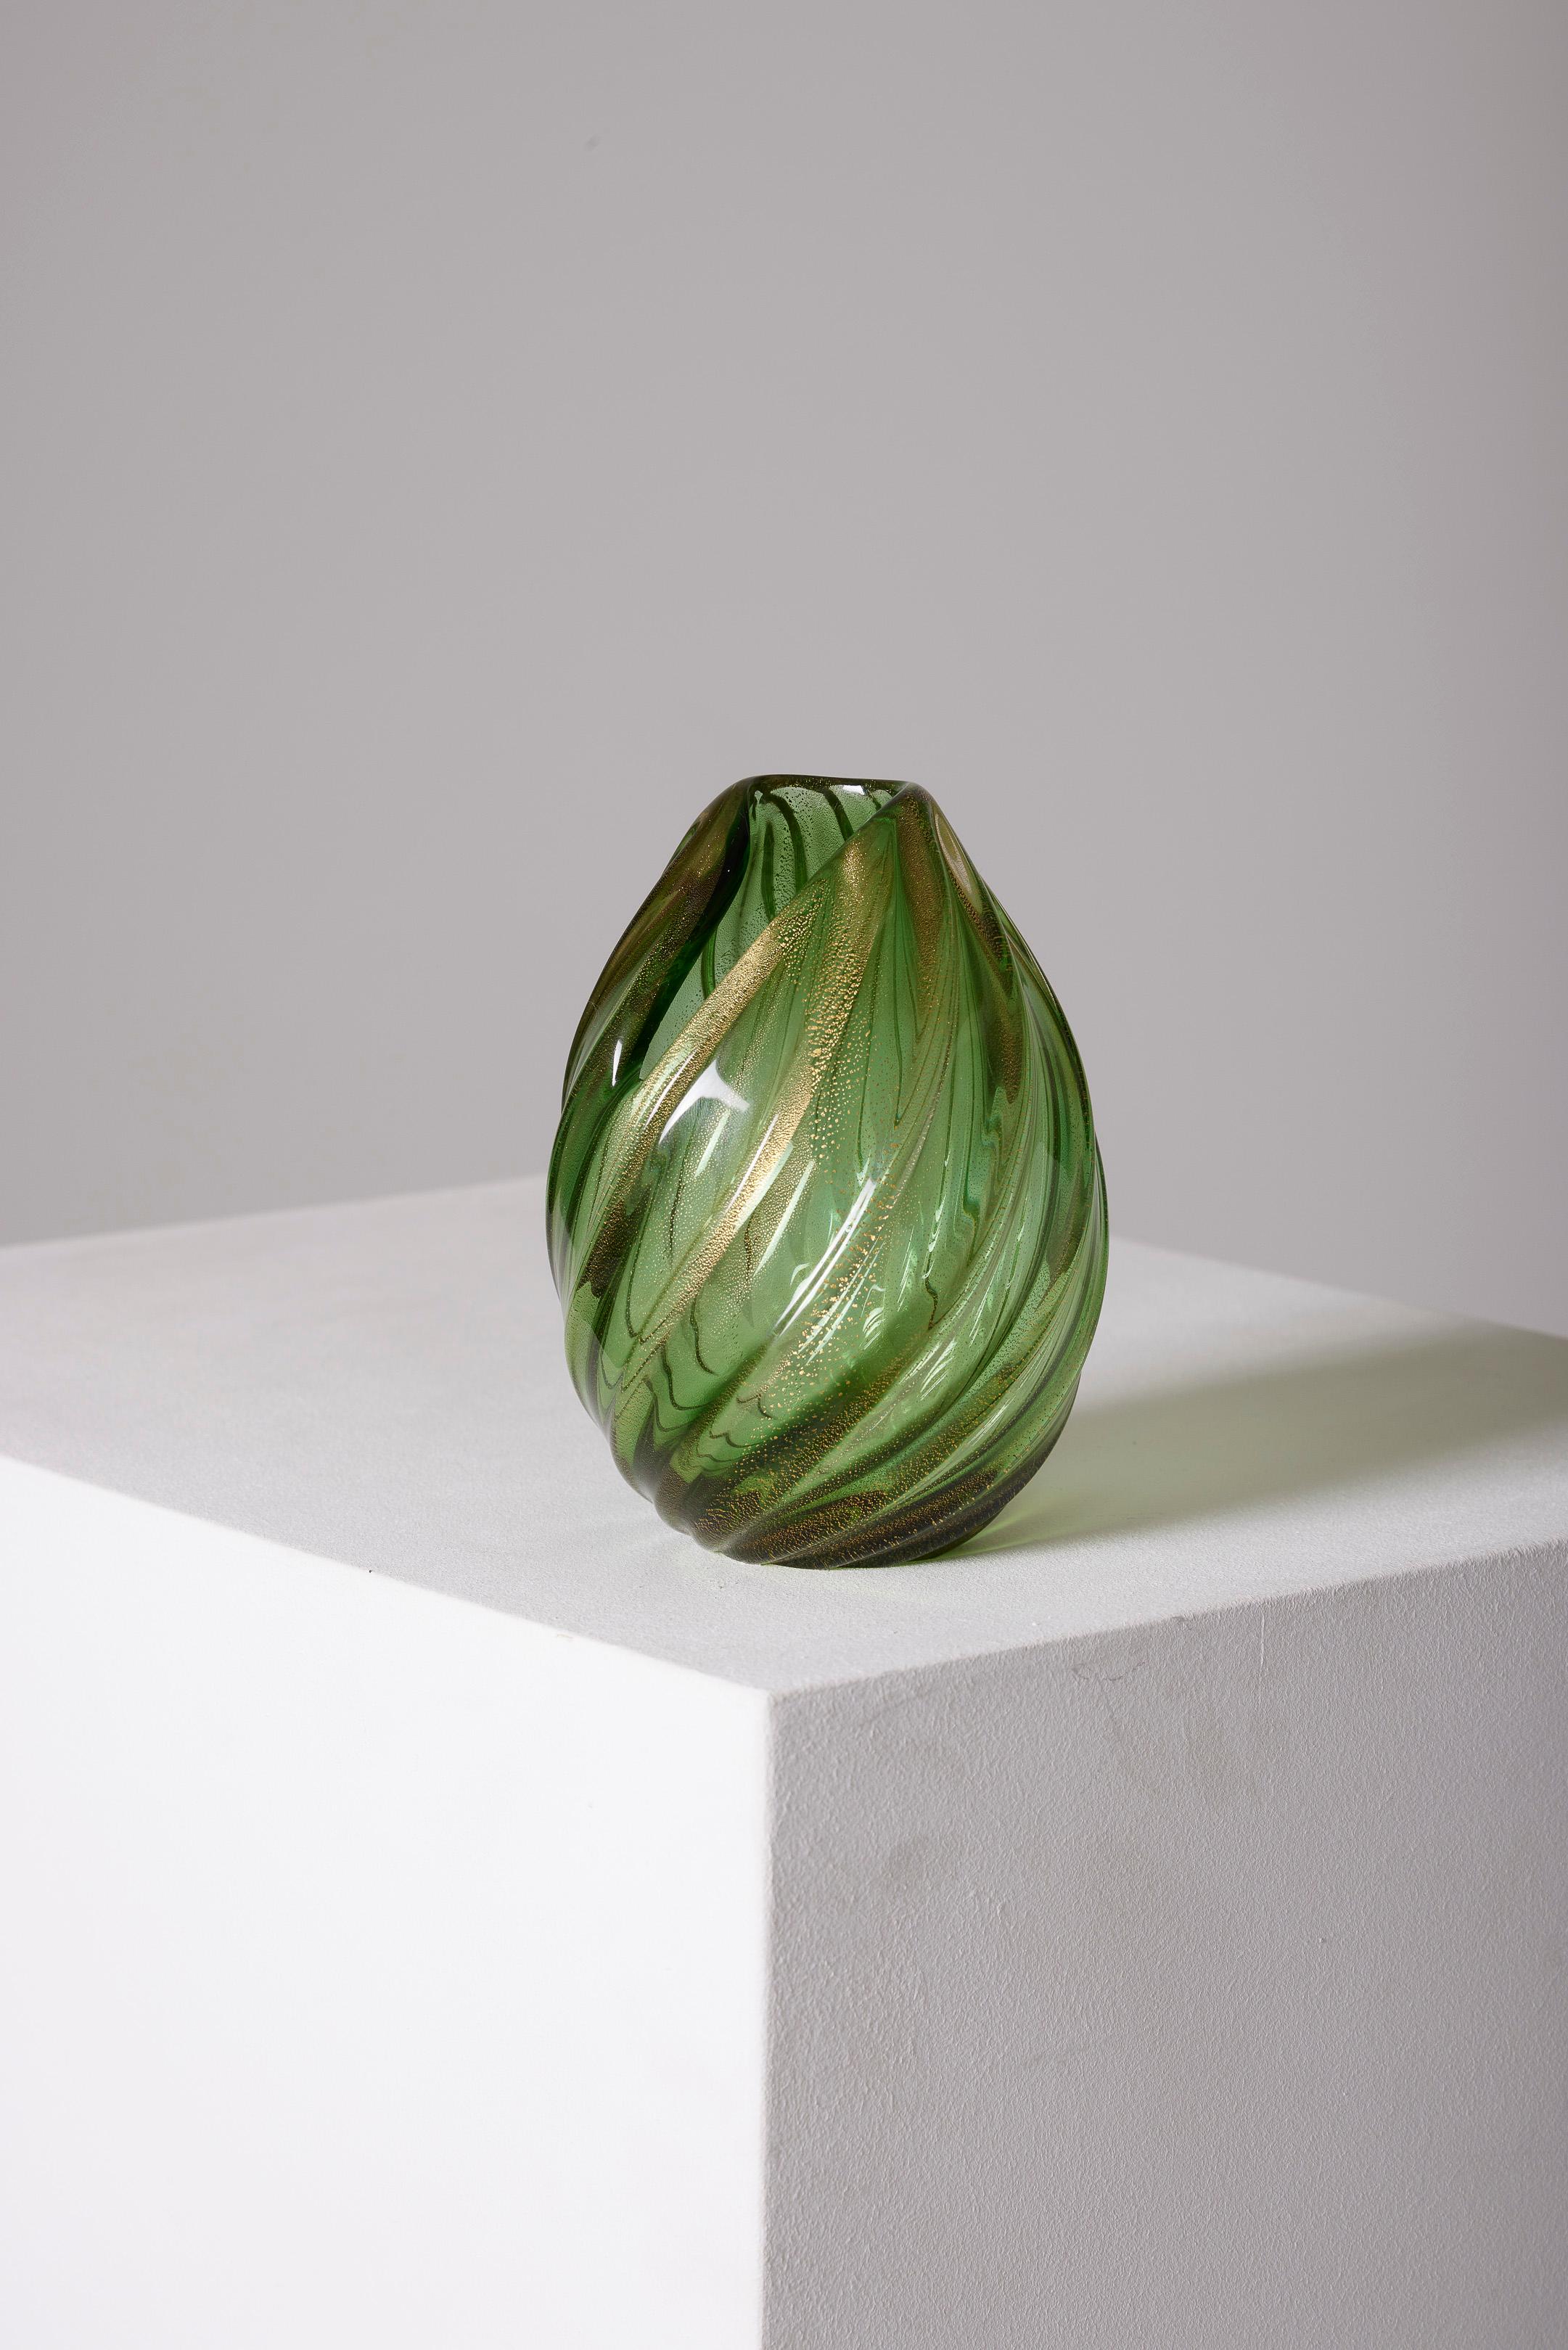 Glass blown vase from Murano signed by Archimede Seguso, handmade in Italy. This vase showcases ribbed iridescence in a stunning shade of green, with applications of ribbed bands tinted with gold and green. The vase has been crafted with great care